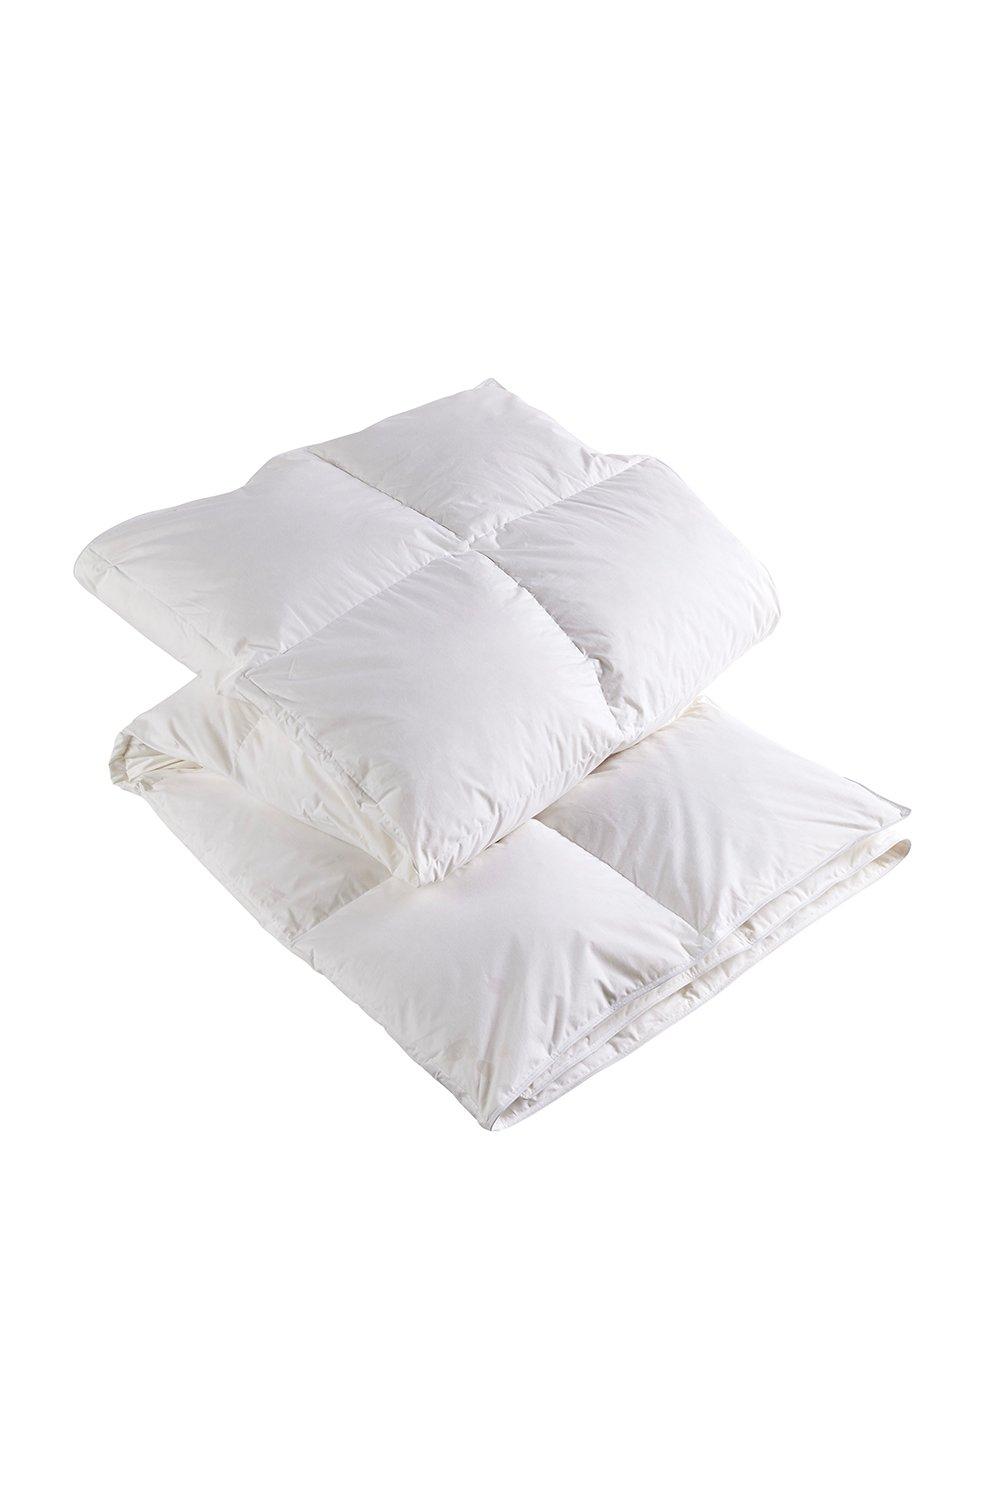 Feather and Down Anti-Dustmite Filled Bedding 10.5 Tog Duvet